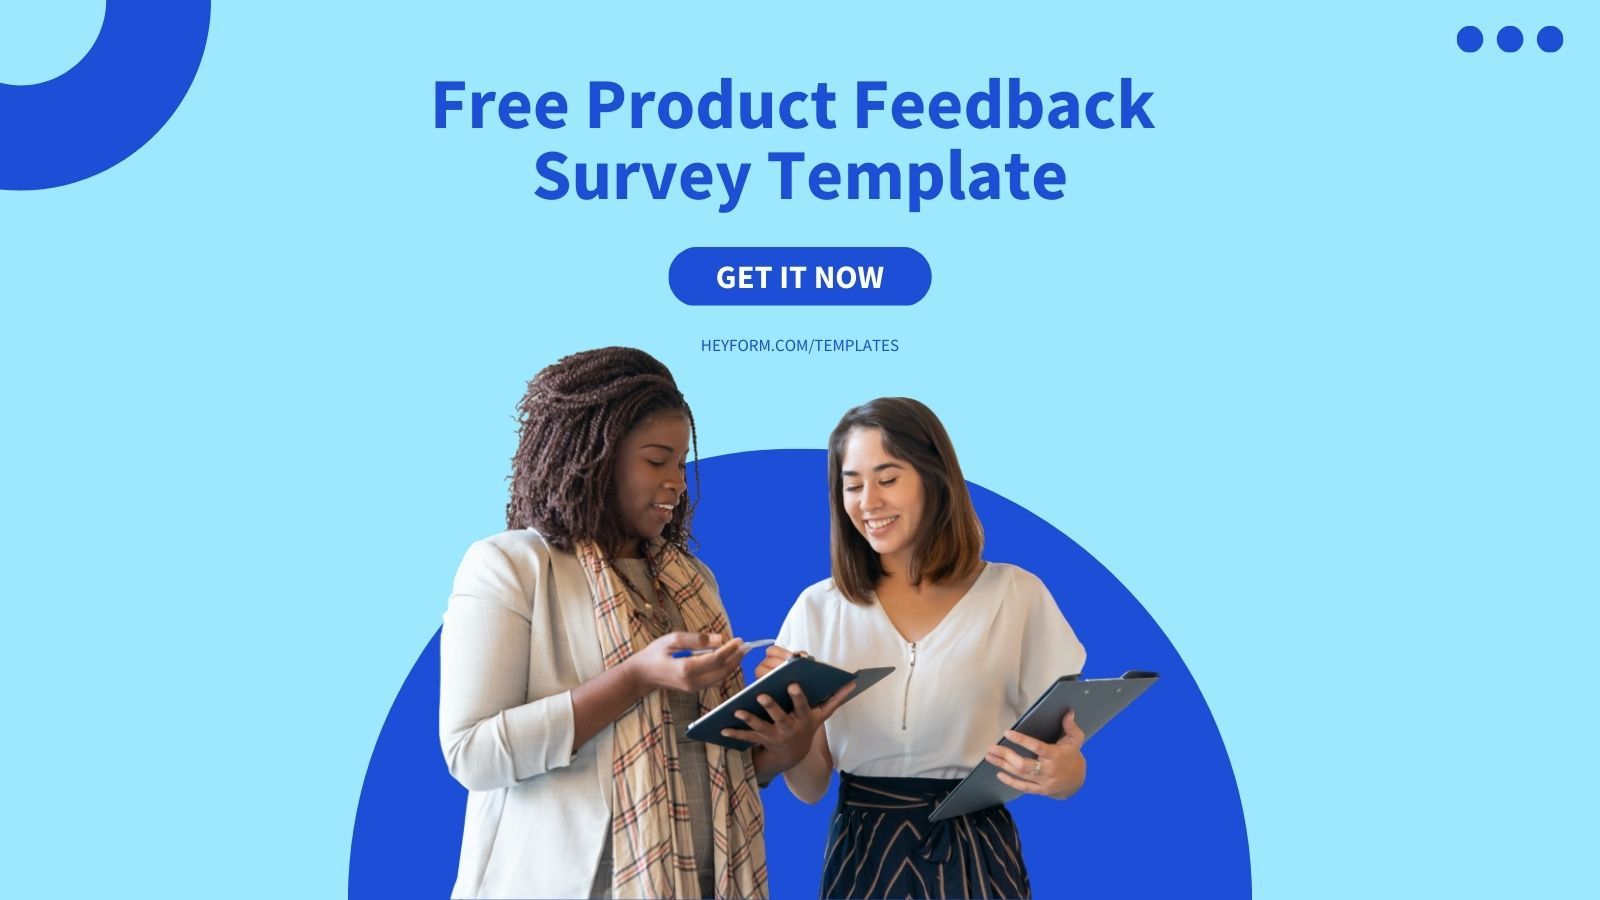 Get Product Feedback Survey Template